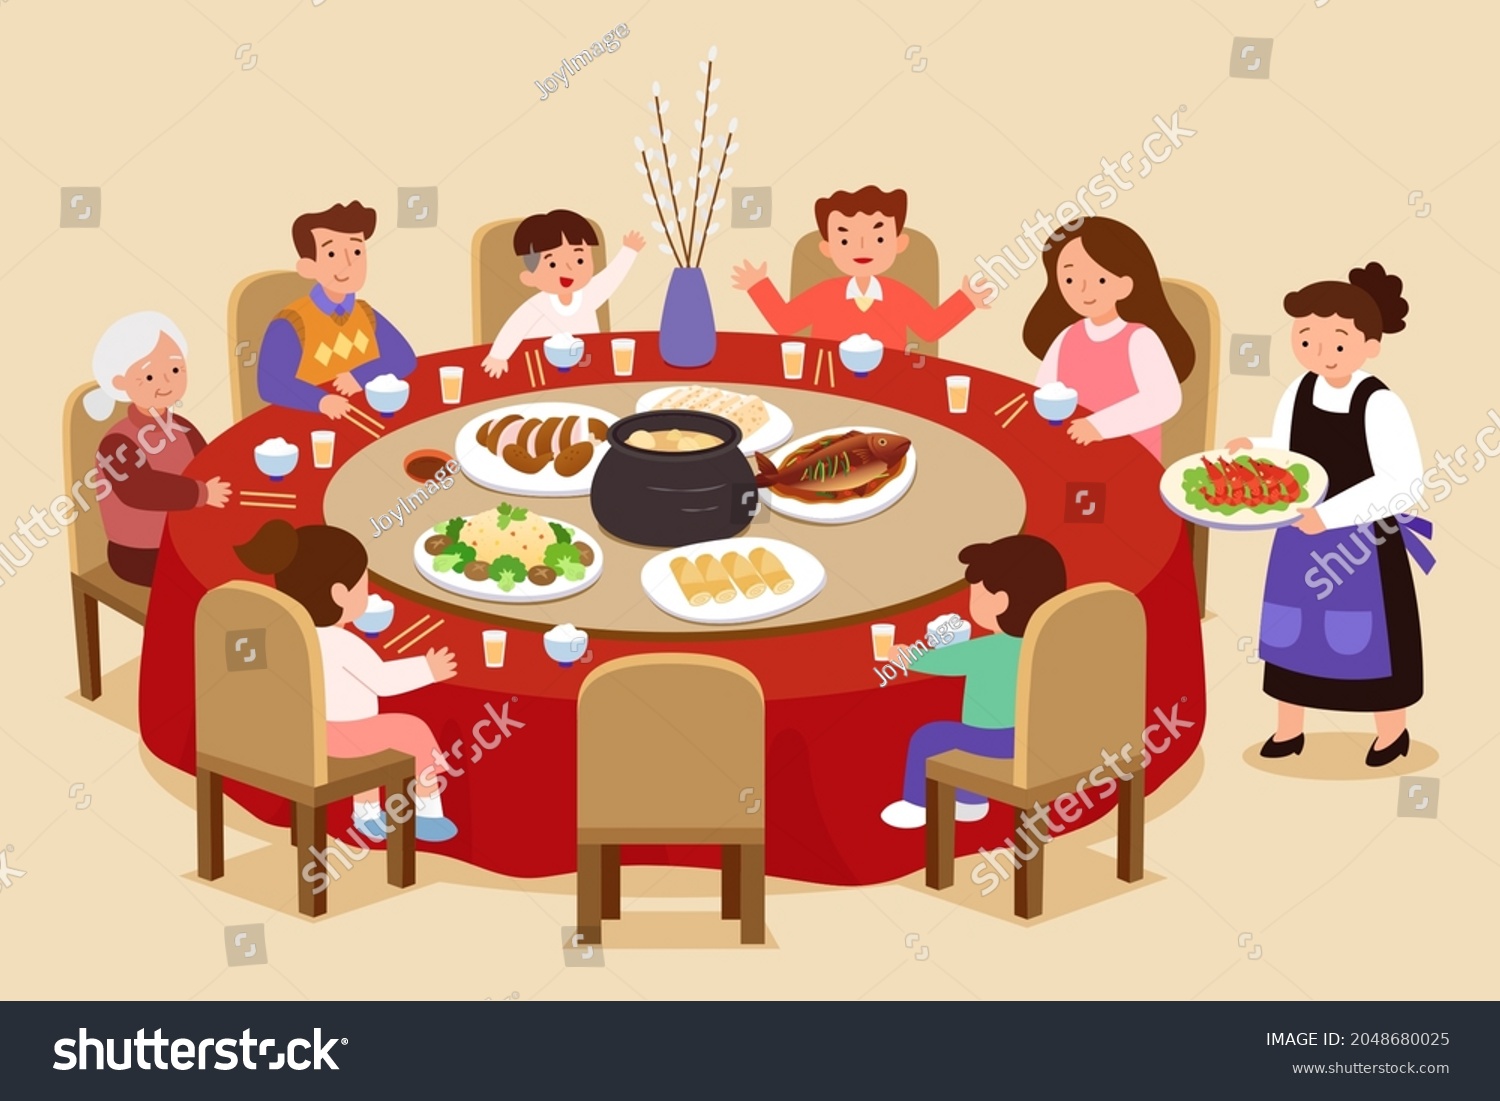 SVG of Asian family group having reunion dinner on the round table at a restaurant on beige background svg